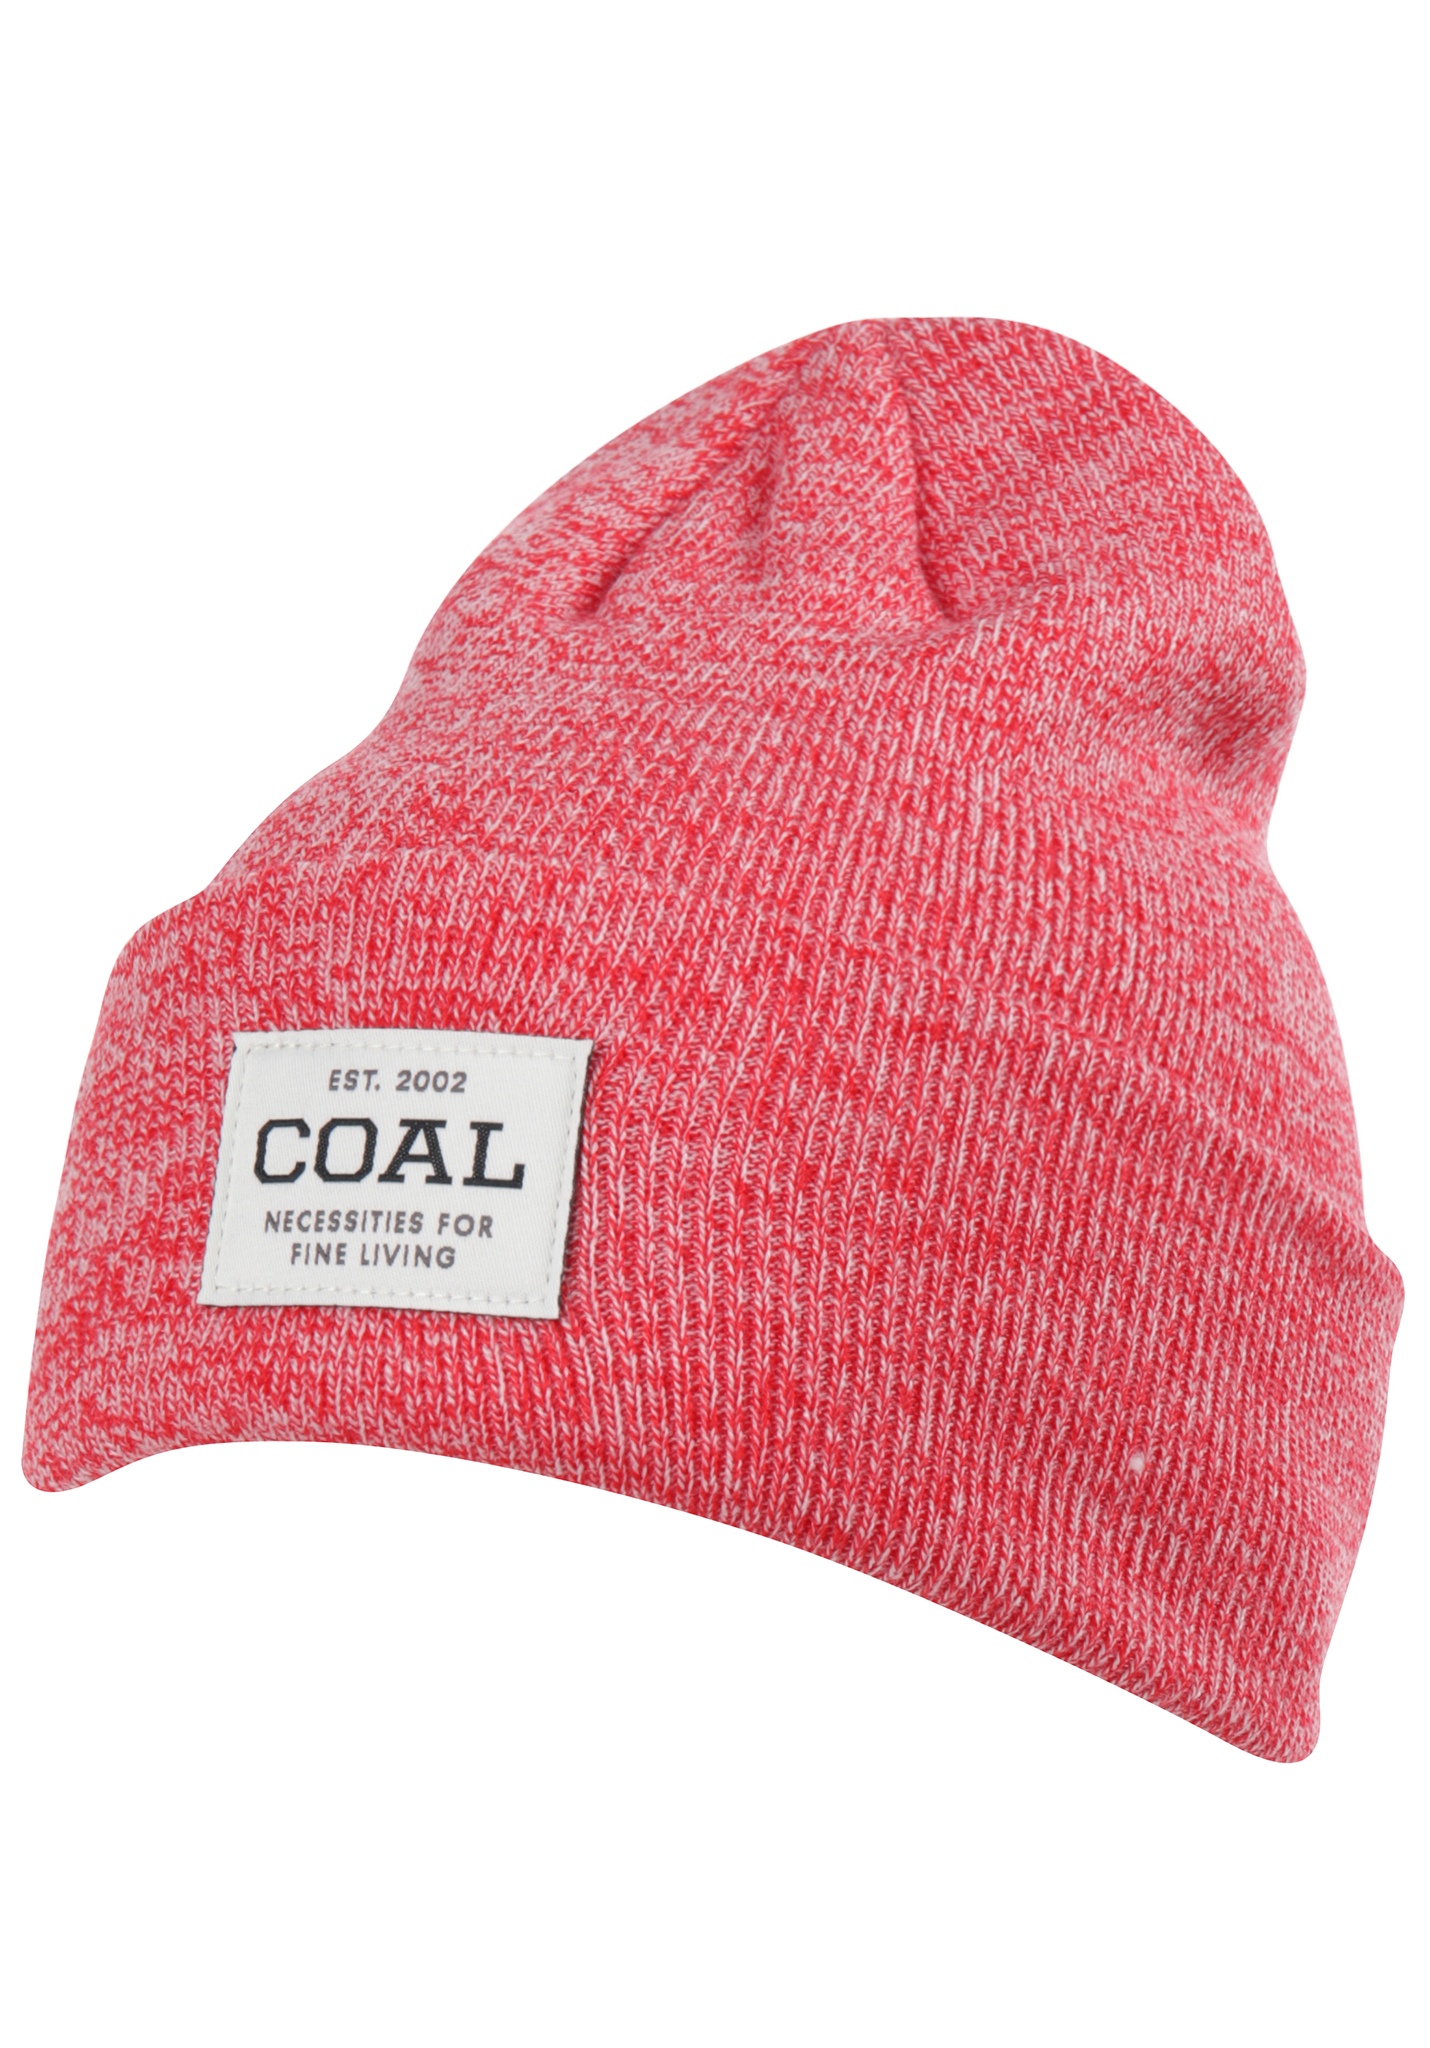 Coal The Uniform roter mergel One Size